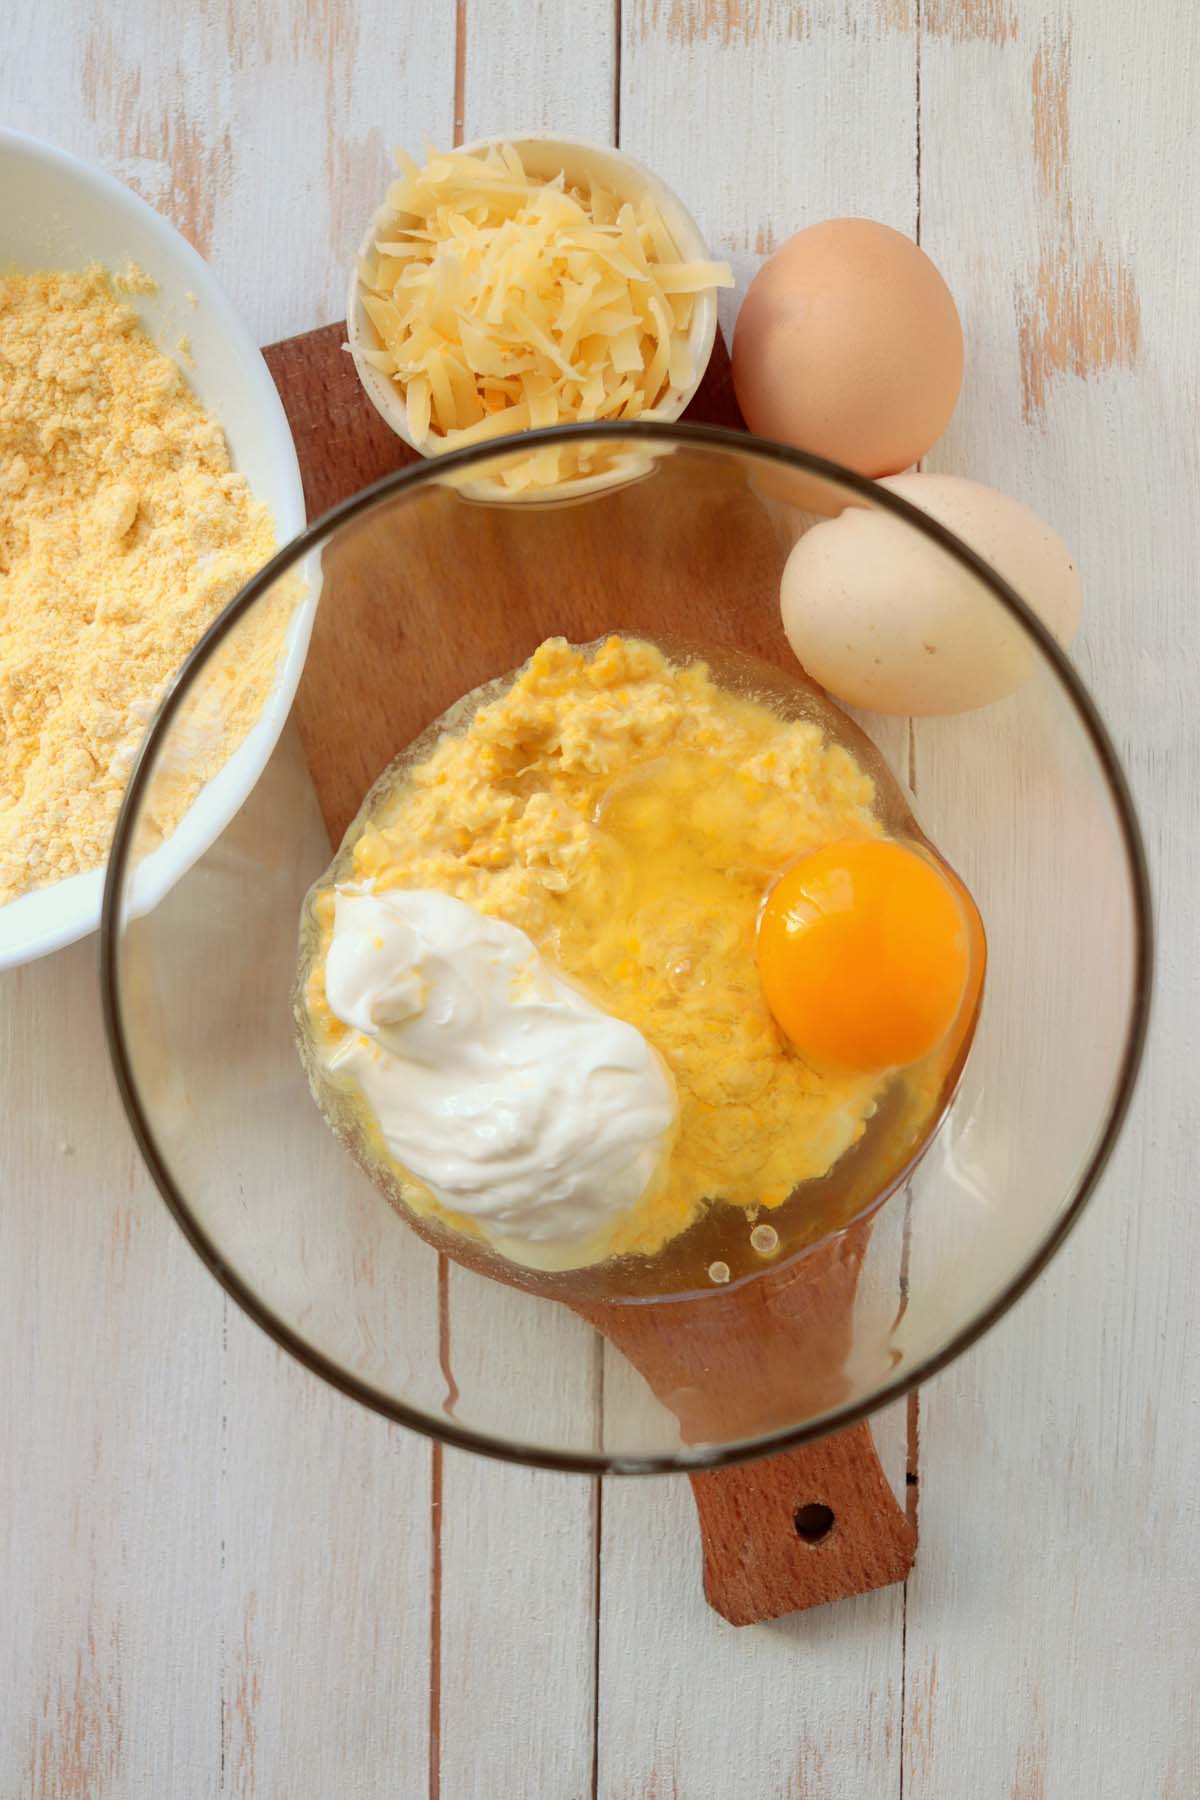 Creamed corn, sour cream and an egg in a bowl.